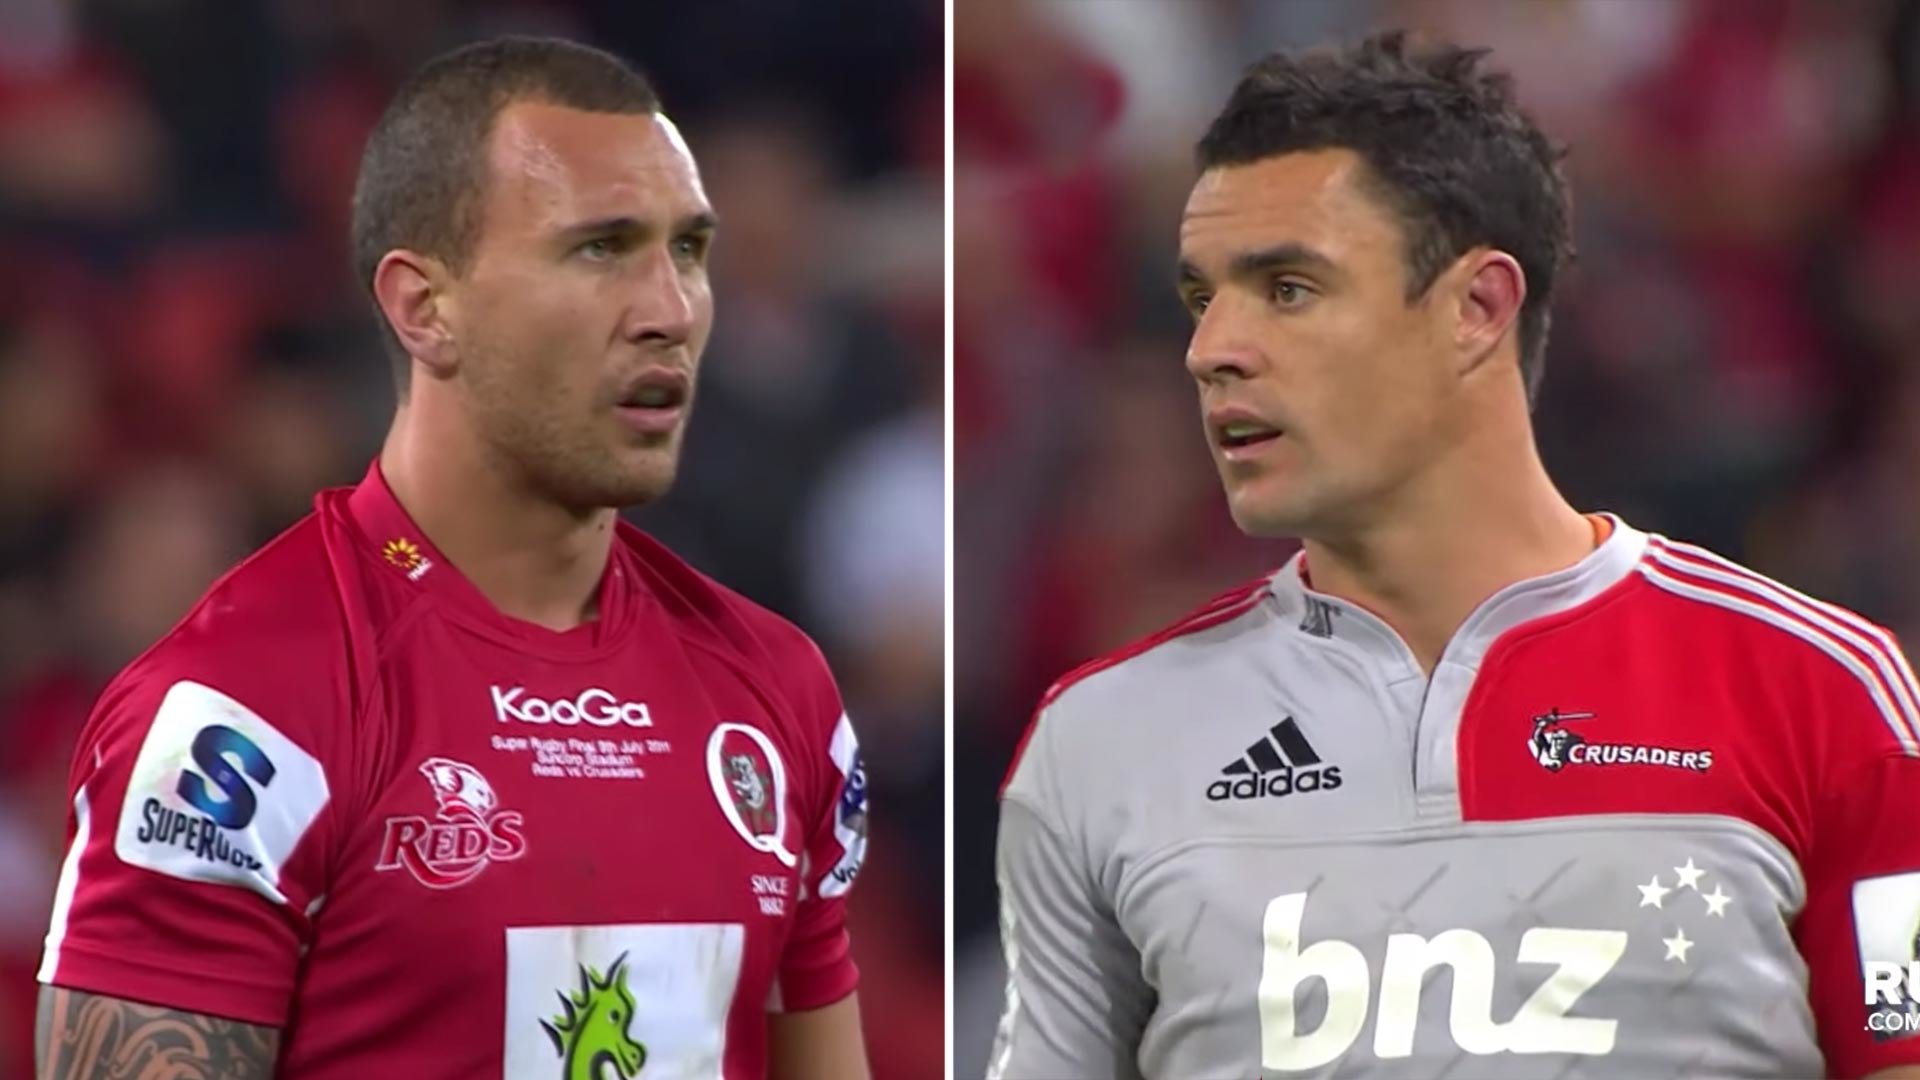 The time when Dan Carter and Quade Cooper played each other in their prime